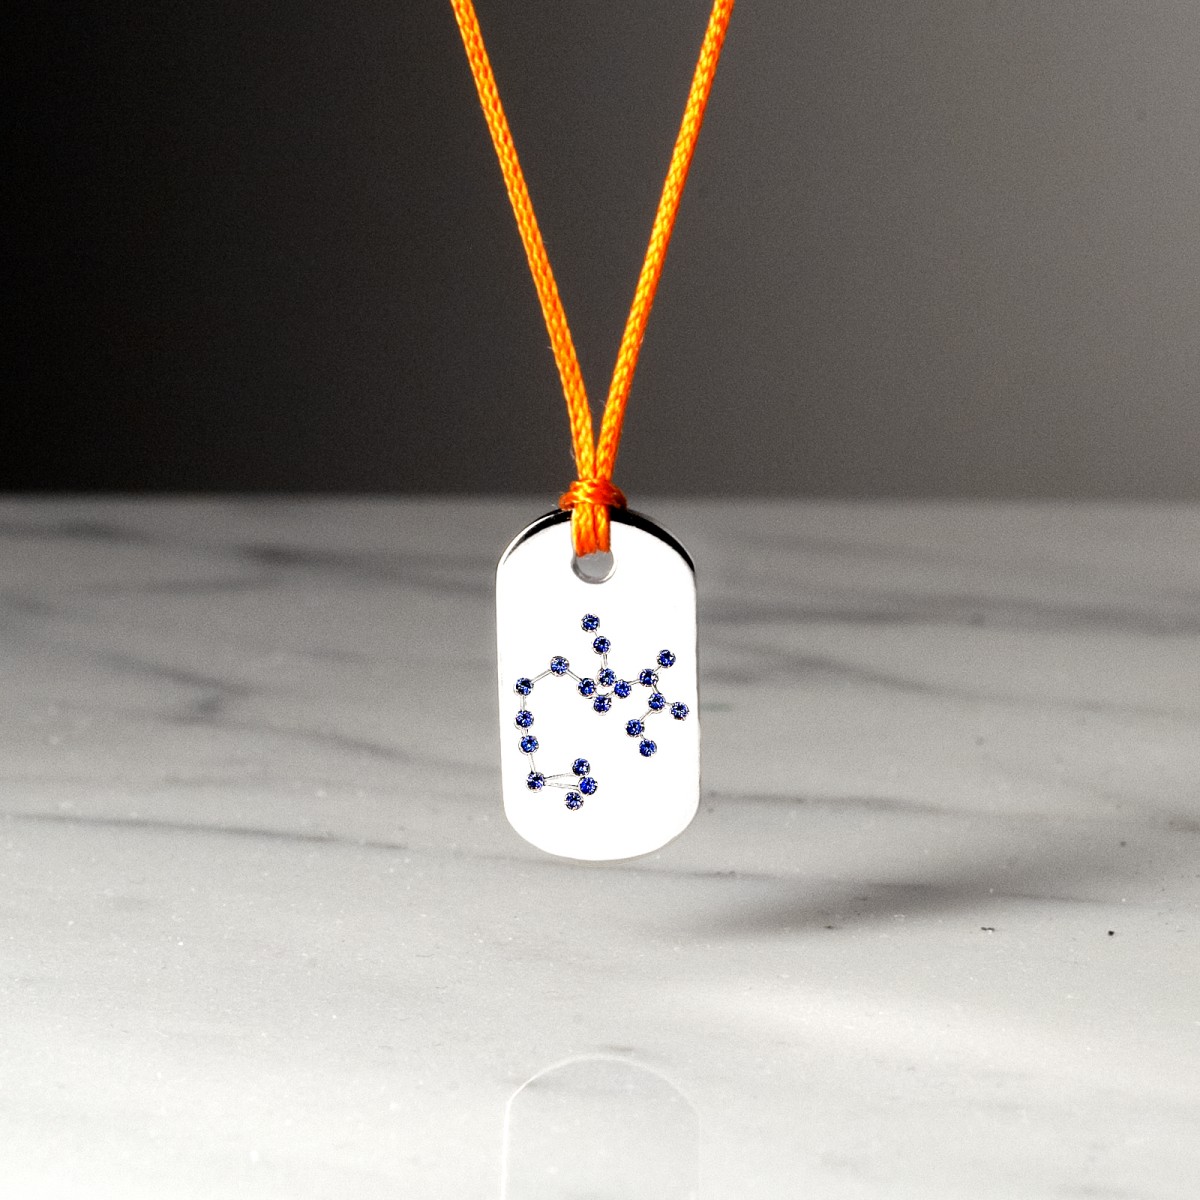 VOUS ETES SAGITAIRE - Necklace handcrafted by the Hervé Domar workshop